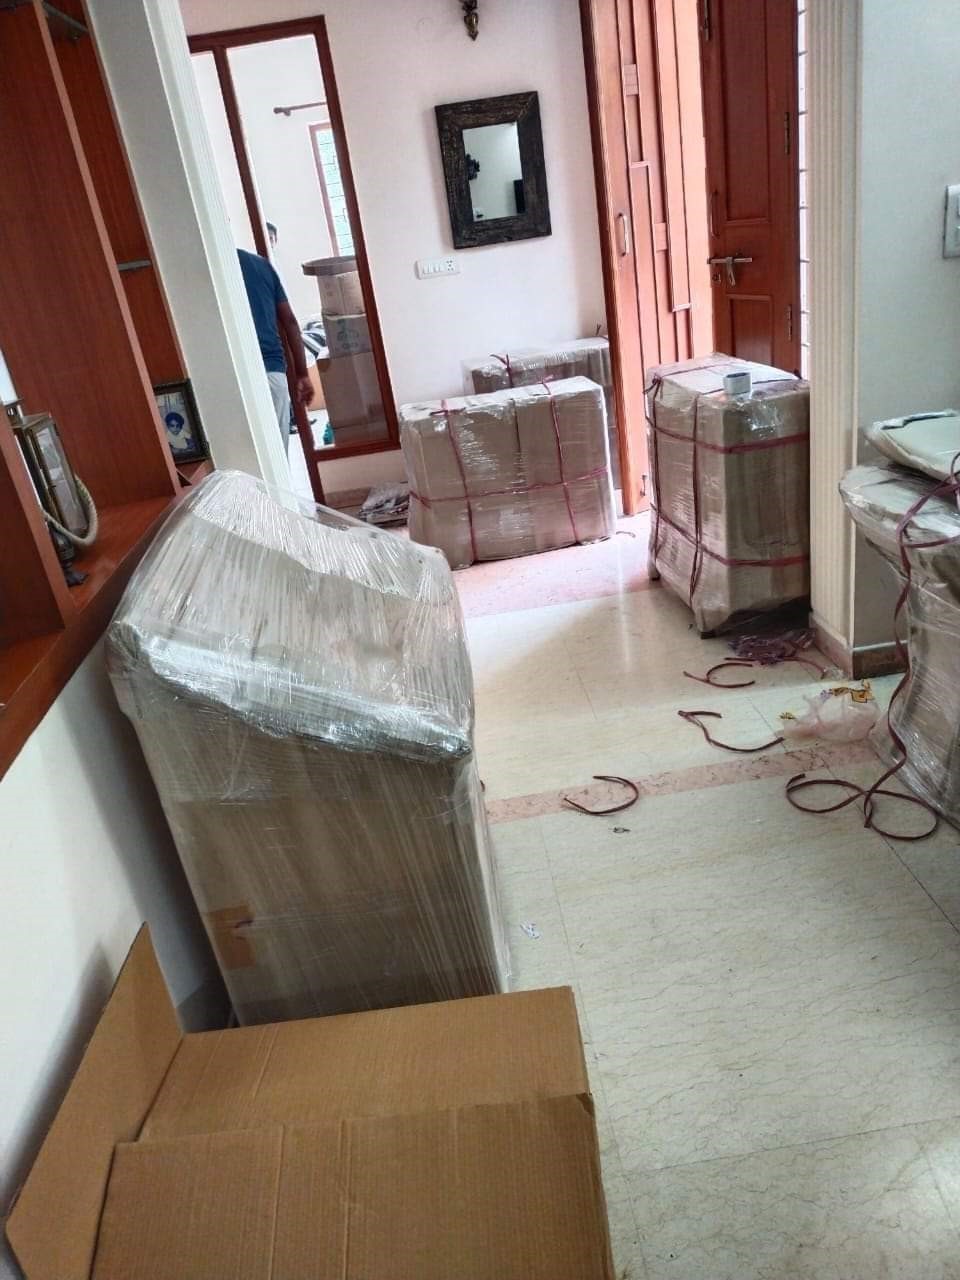 Picture of Rehousing packers and movers Self Storage courier services in Patna images office